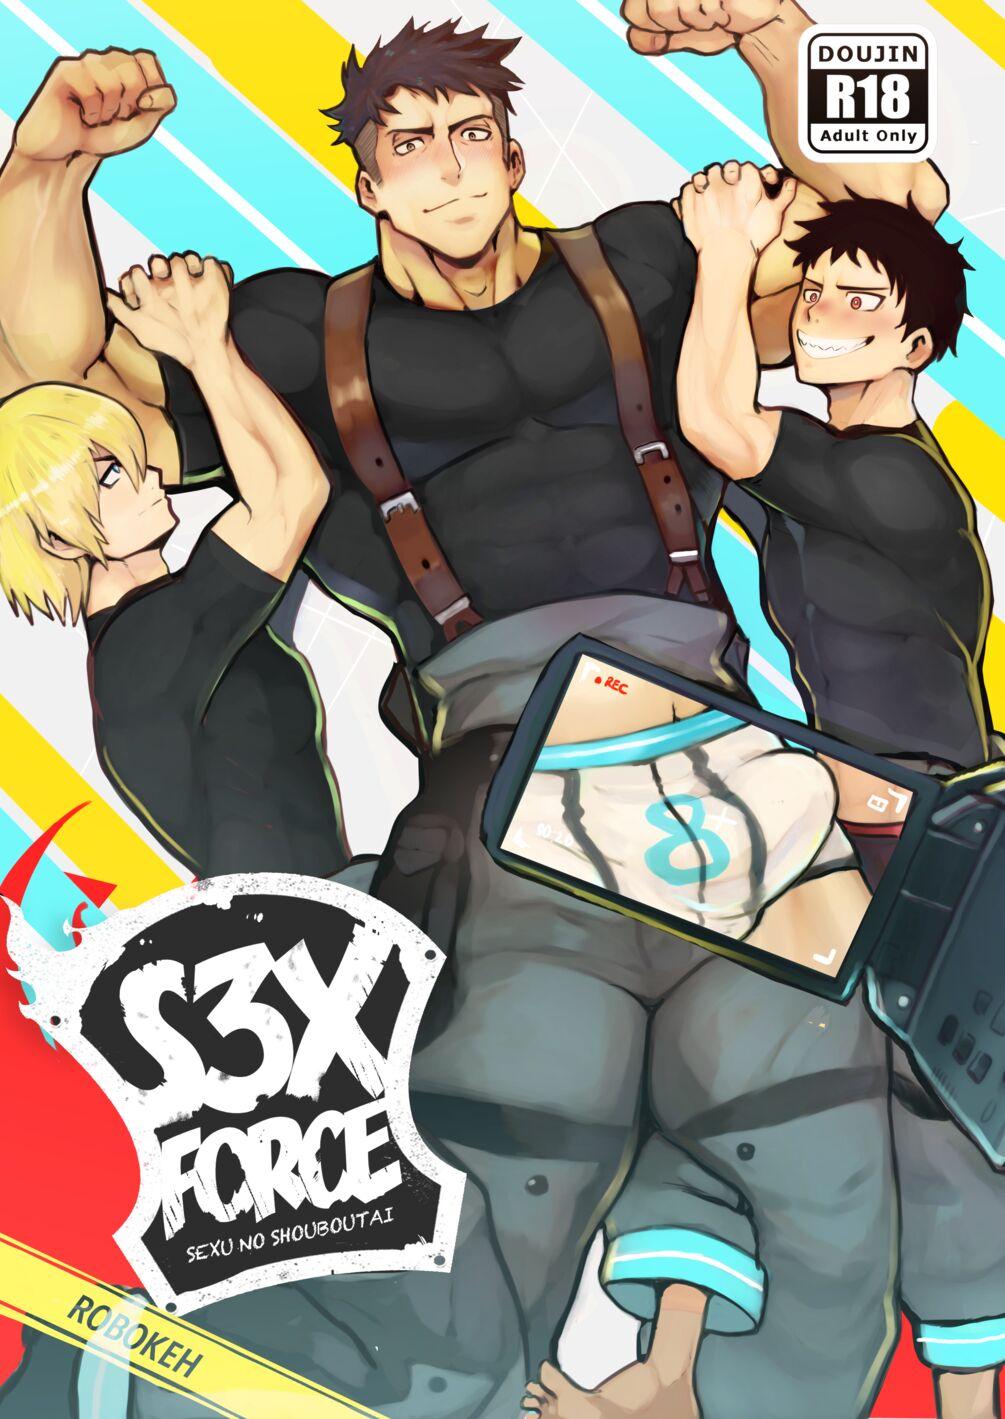 S3X FORCE 0